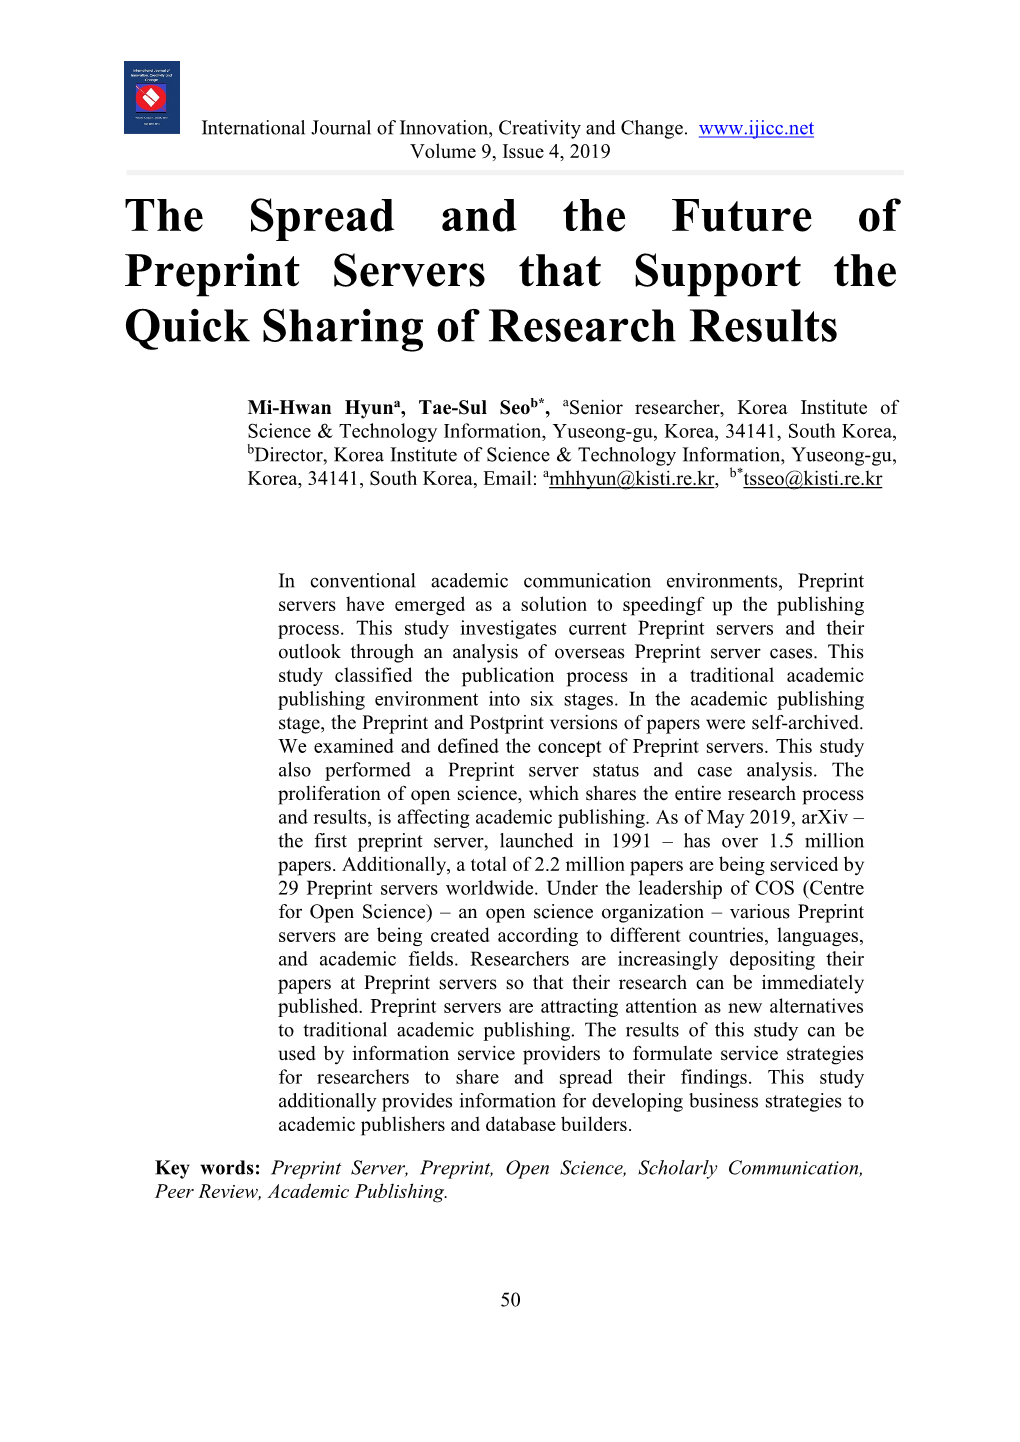 The Spread and the Future of Preprint Servers That Support the Quick Sharing of Research Results